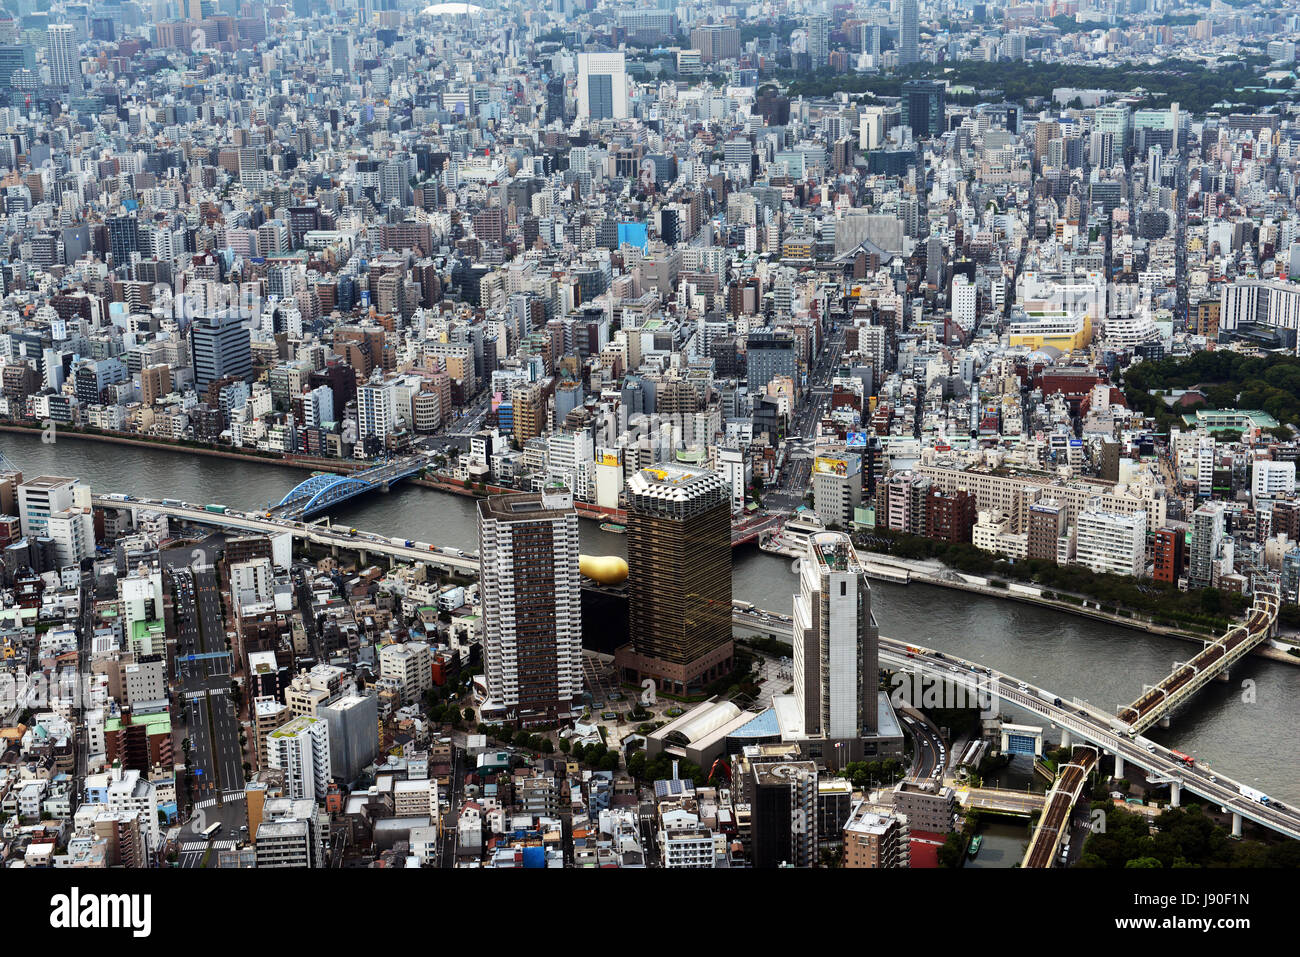 Views of Tokyo as seen from the top of the Tokyo skytree. Stock Photo